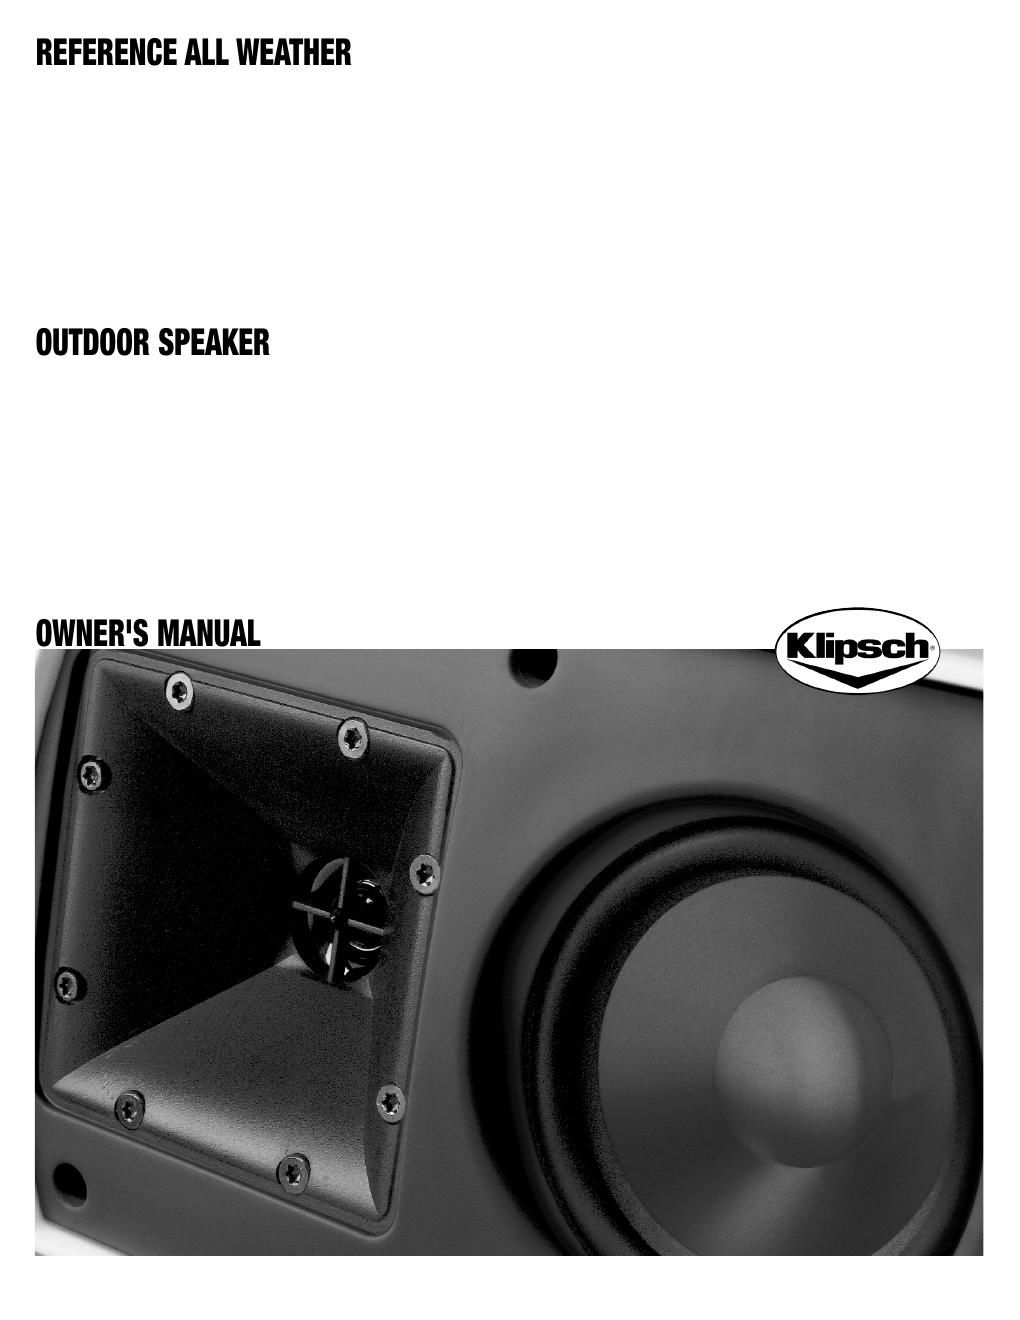 klipsch aw 650 owners manual